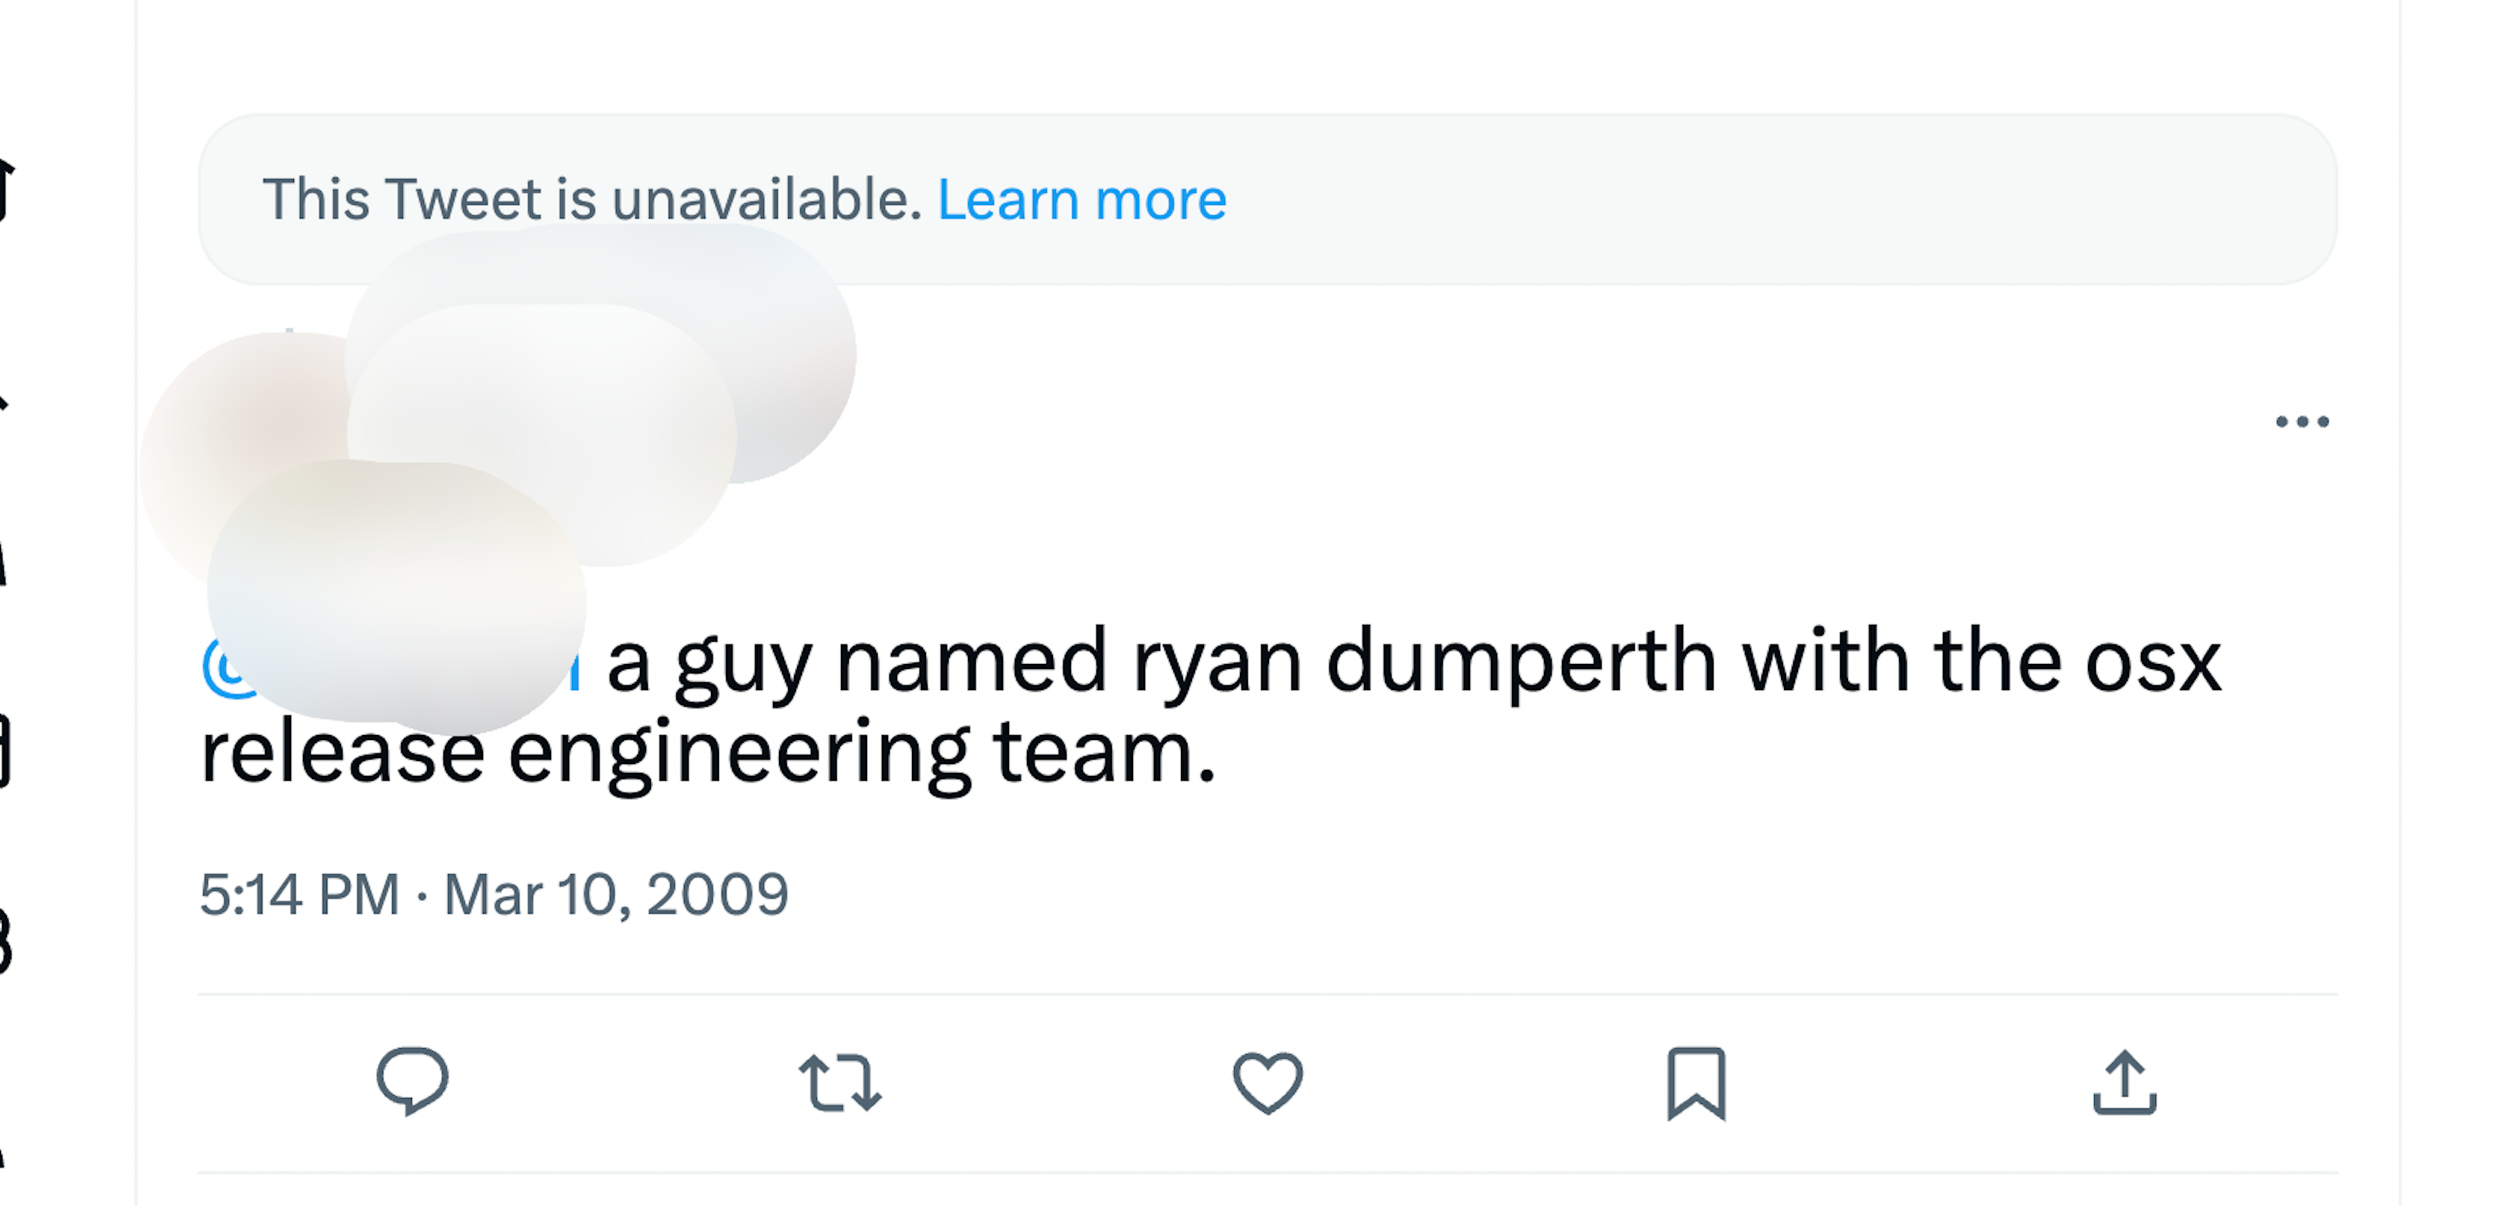 Pic of same user as previous screenshot indicating that he was interviewed by an Apple engineer named Ryan Dumperth "with the osx release engineering team."